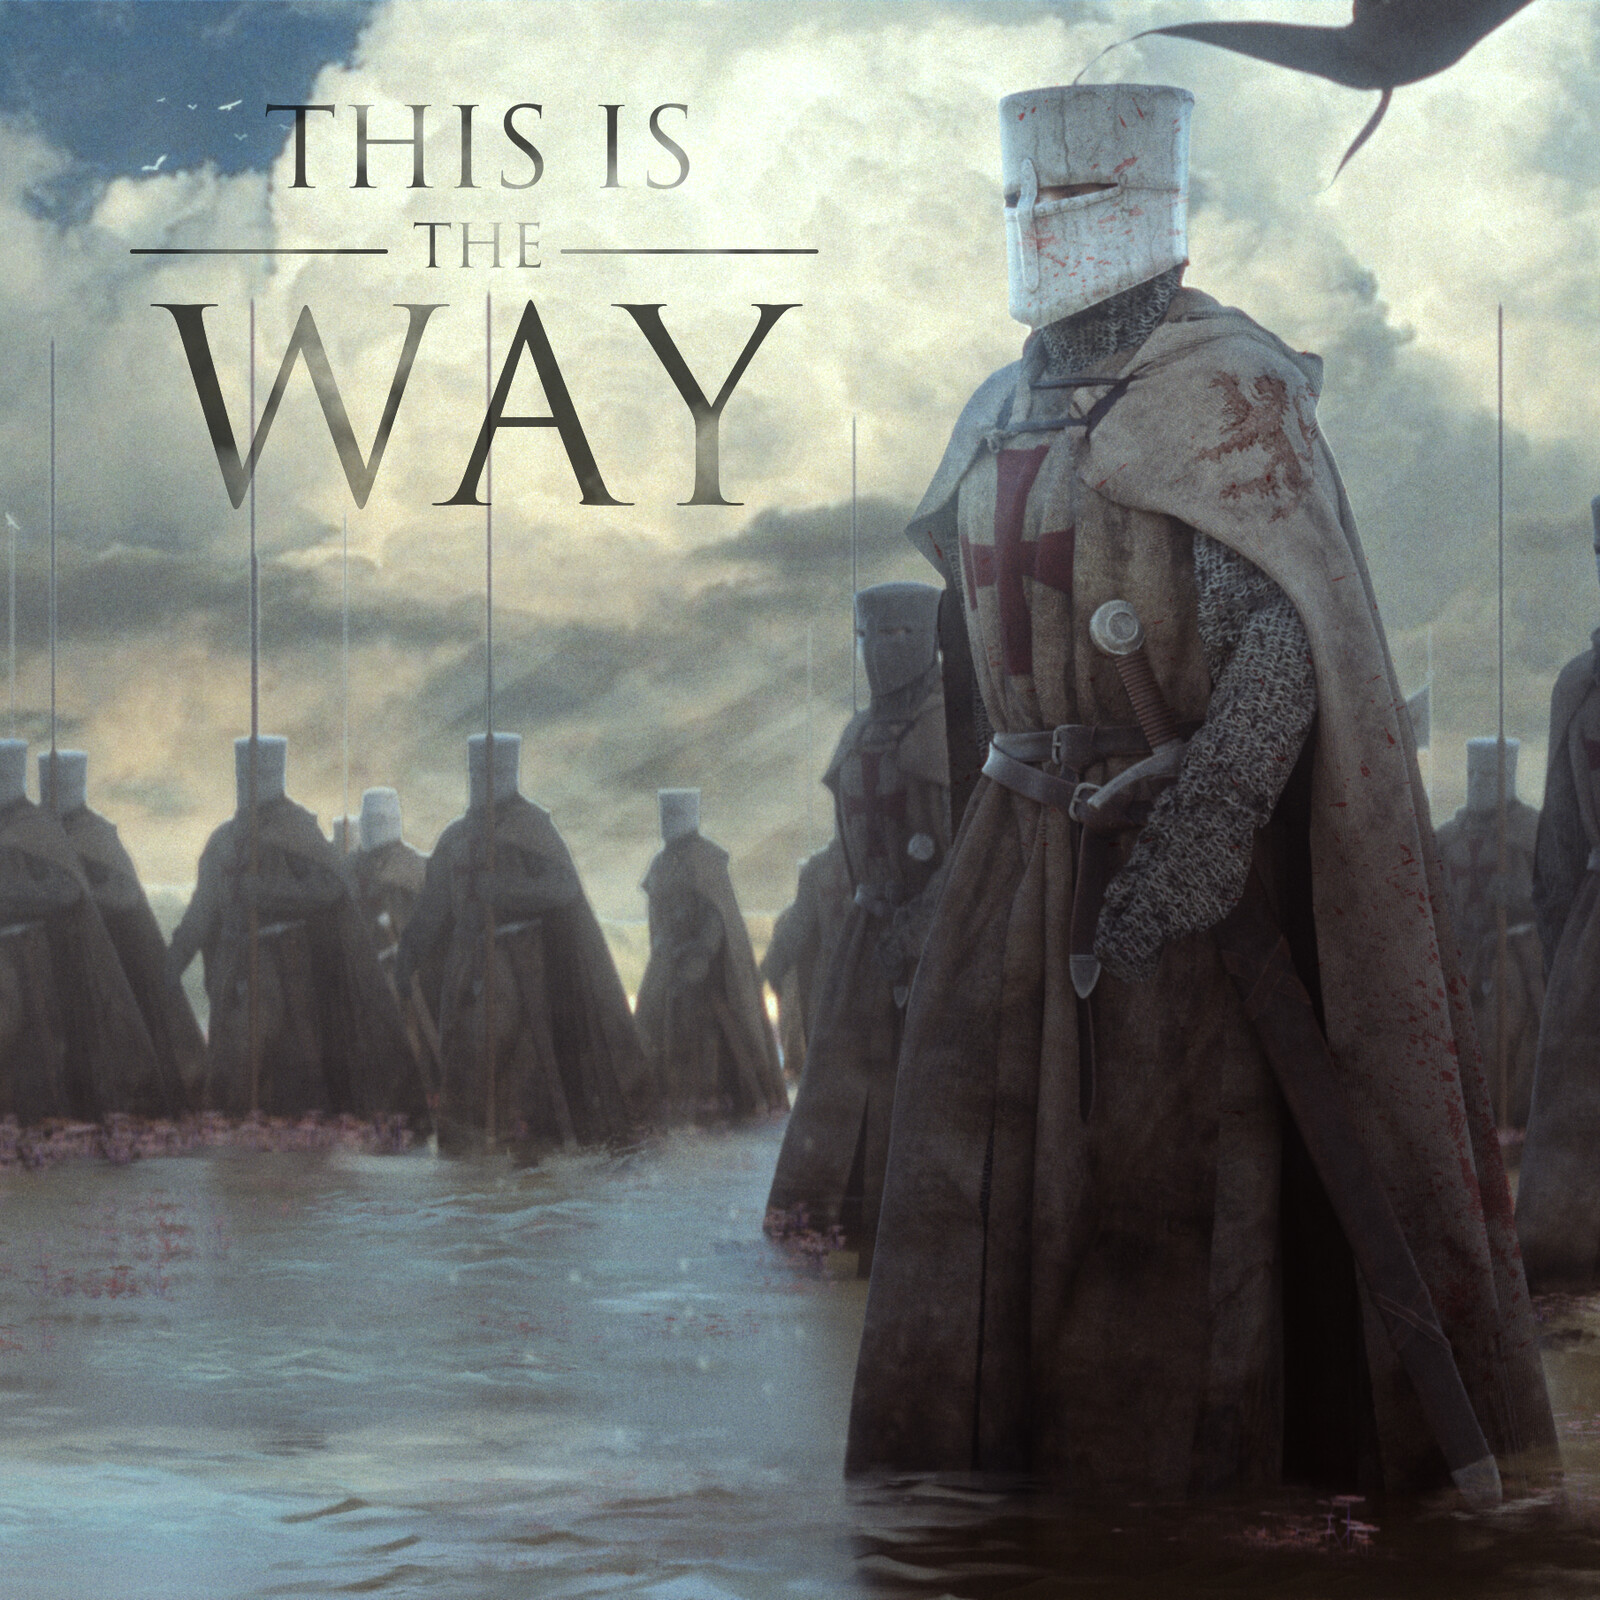 This is the Way (Key Frame Art)